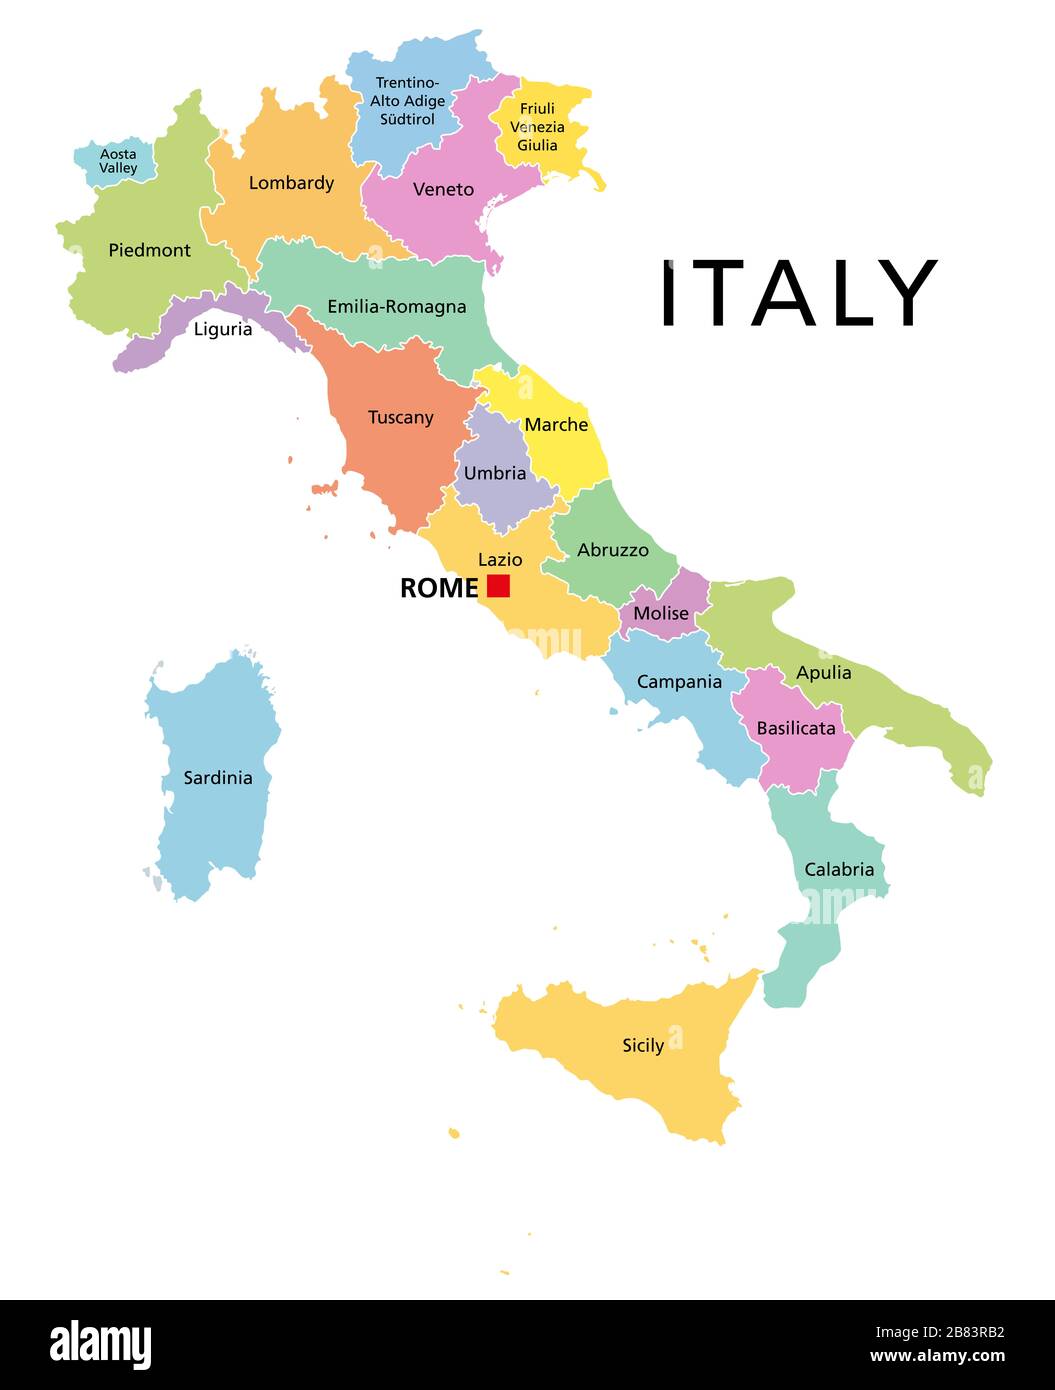 Italy, political map with multicolored administrative divisions. Italian Republic with capital Rome, their 20 regions and borders. English labeling. Stock Photo